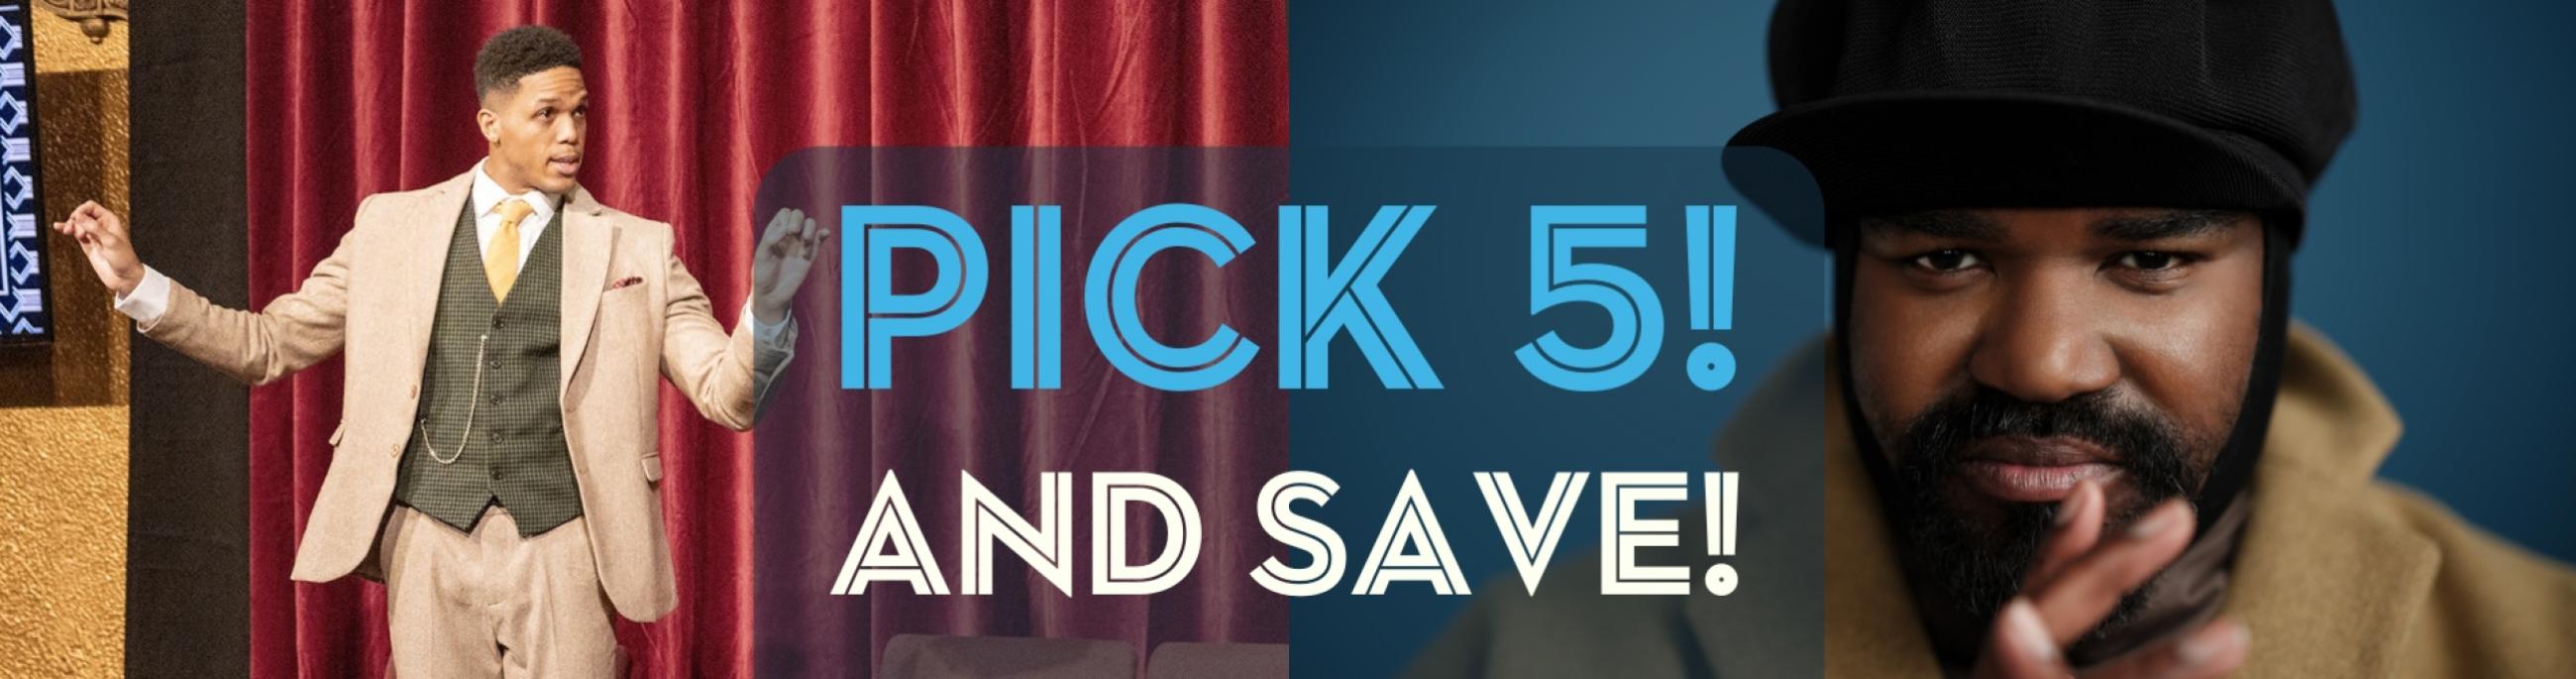 An image proclaims Pick 5 and save with two photos of performers